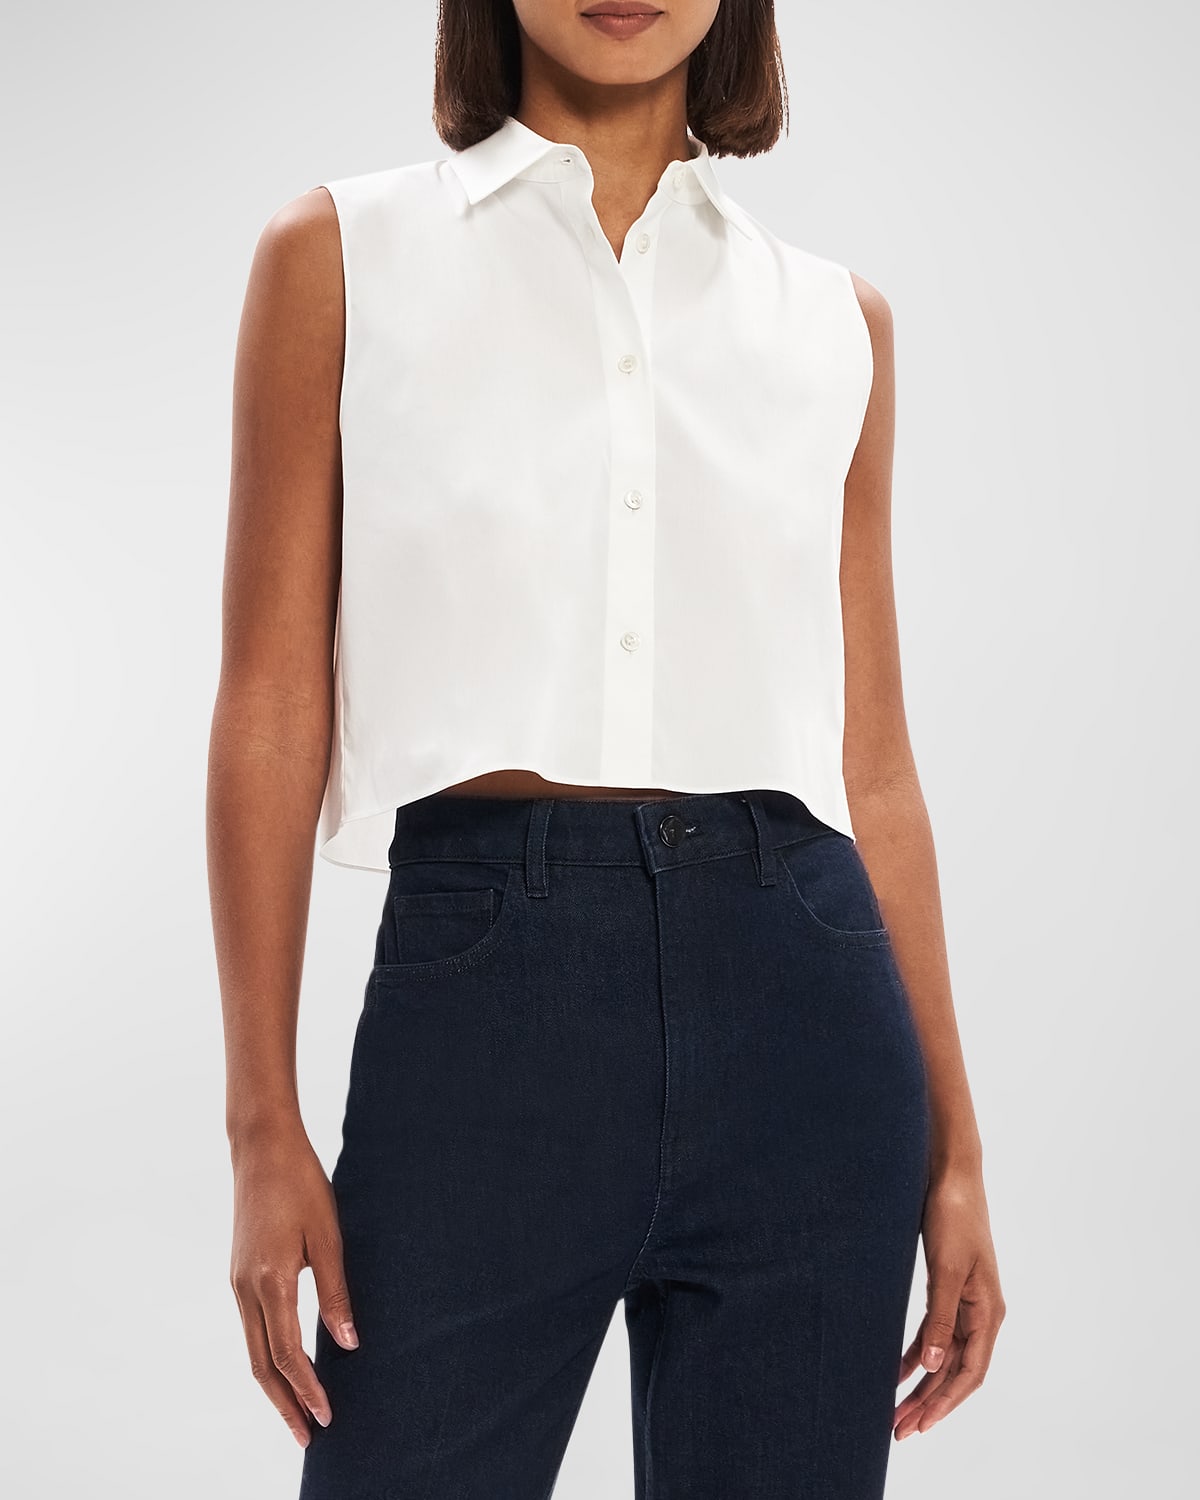 Pima Cotton Short Sleeves Cropped